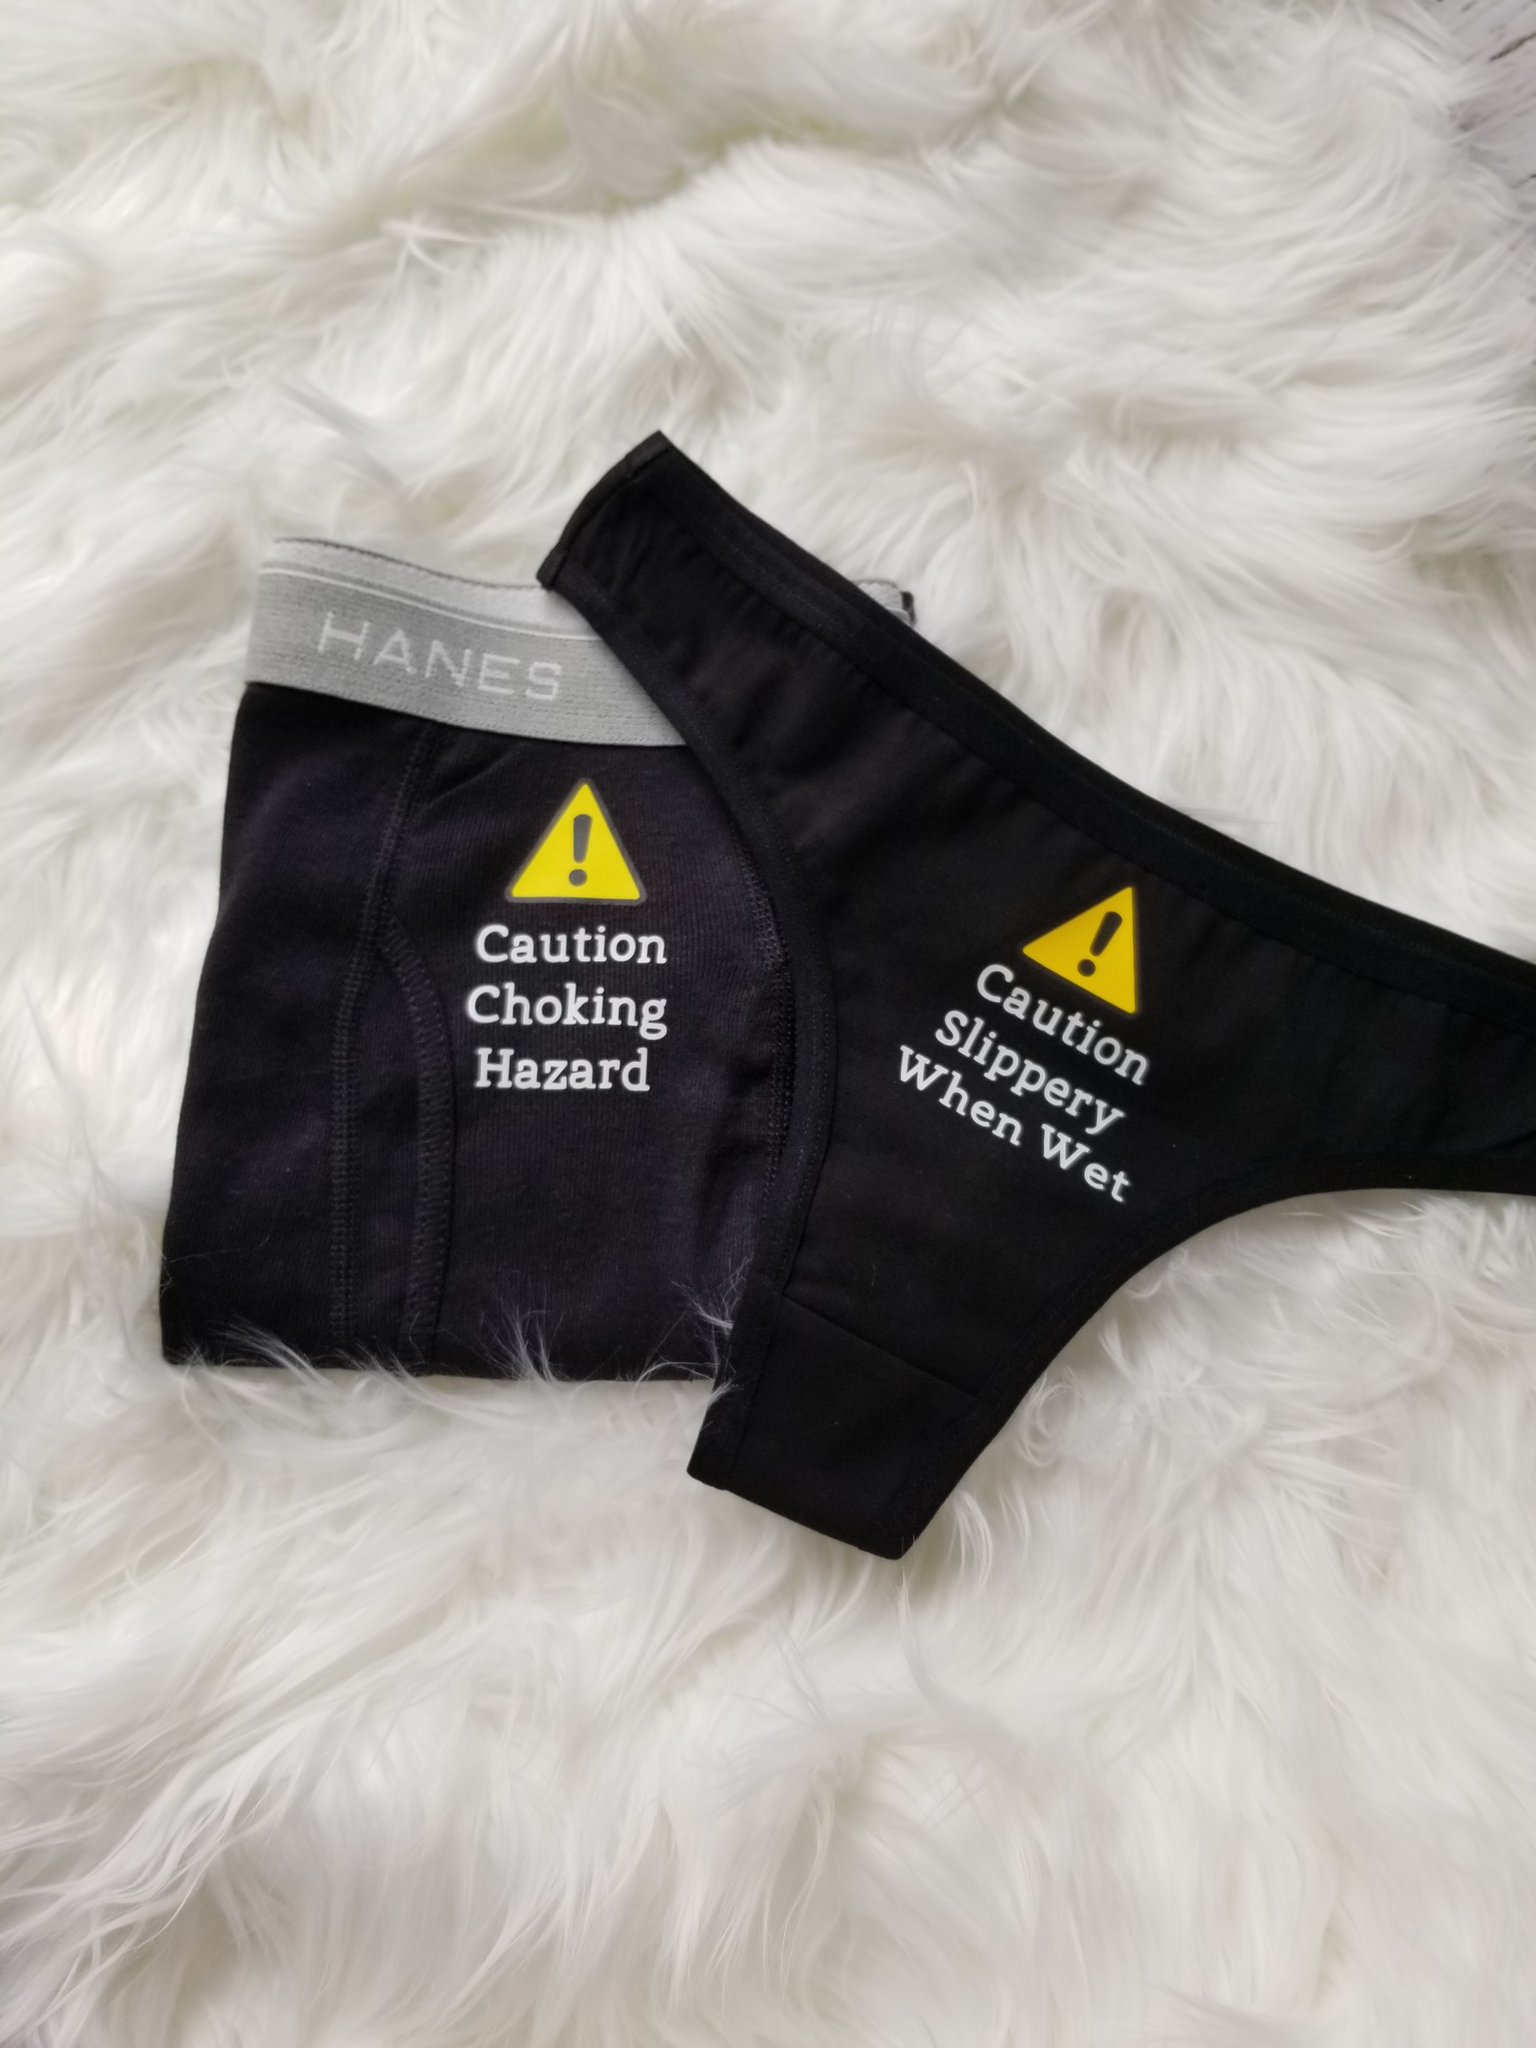  Matching Couples Underwear, Caution Slippery When Wet, Caution  Choking Hazard, His and Hers, Couples Gift (L, Thong, Black) : Handmade  Products